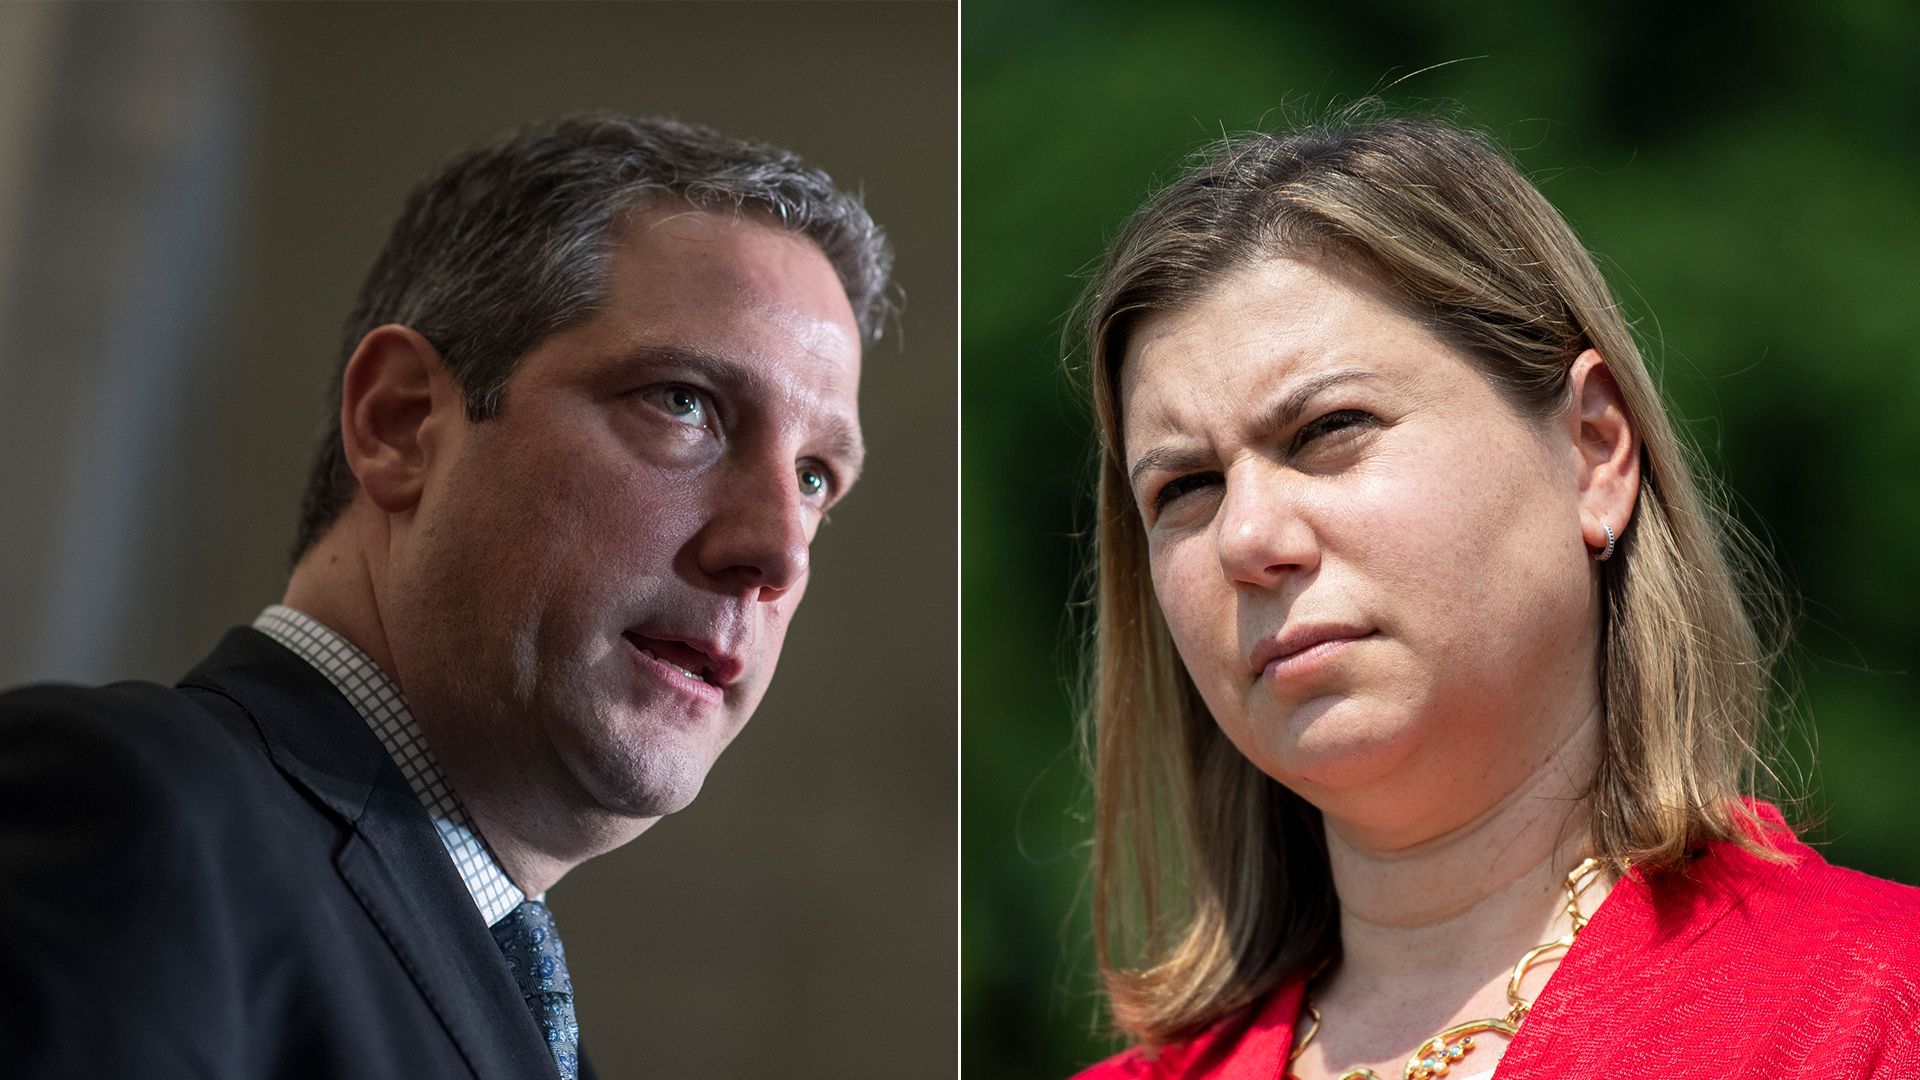 A compilation shows Reps. Tim Ryan and Elissa Slotkin, side-by-side.